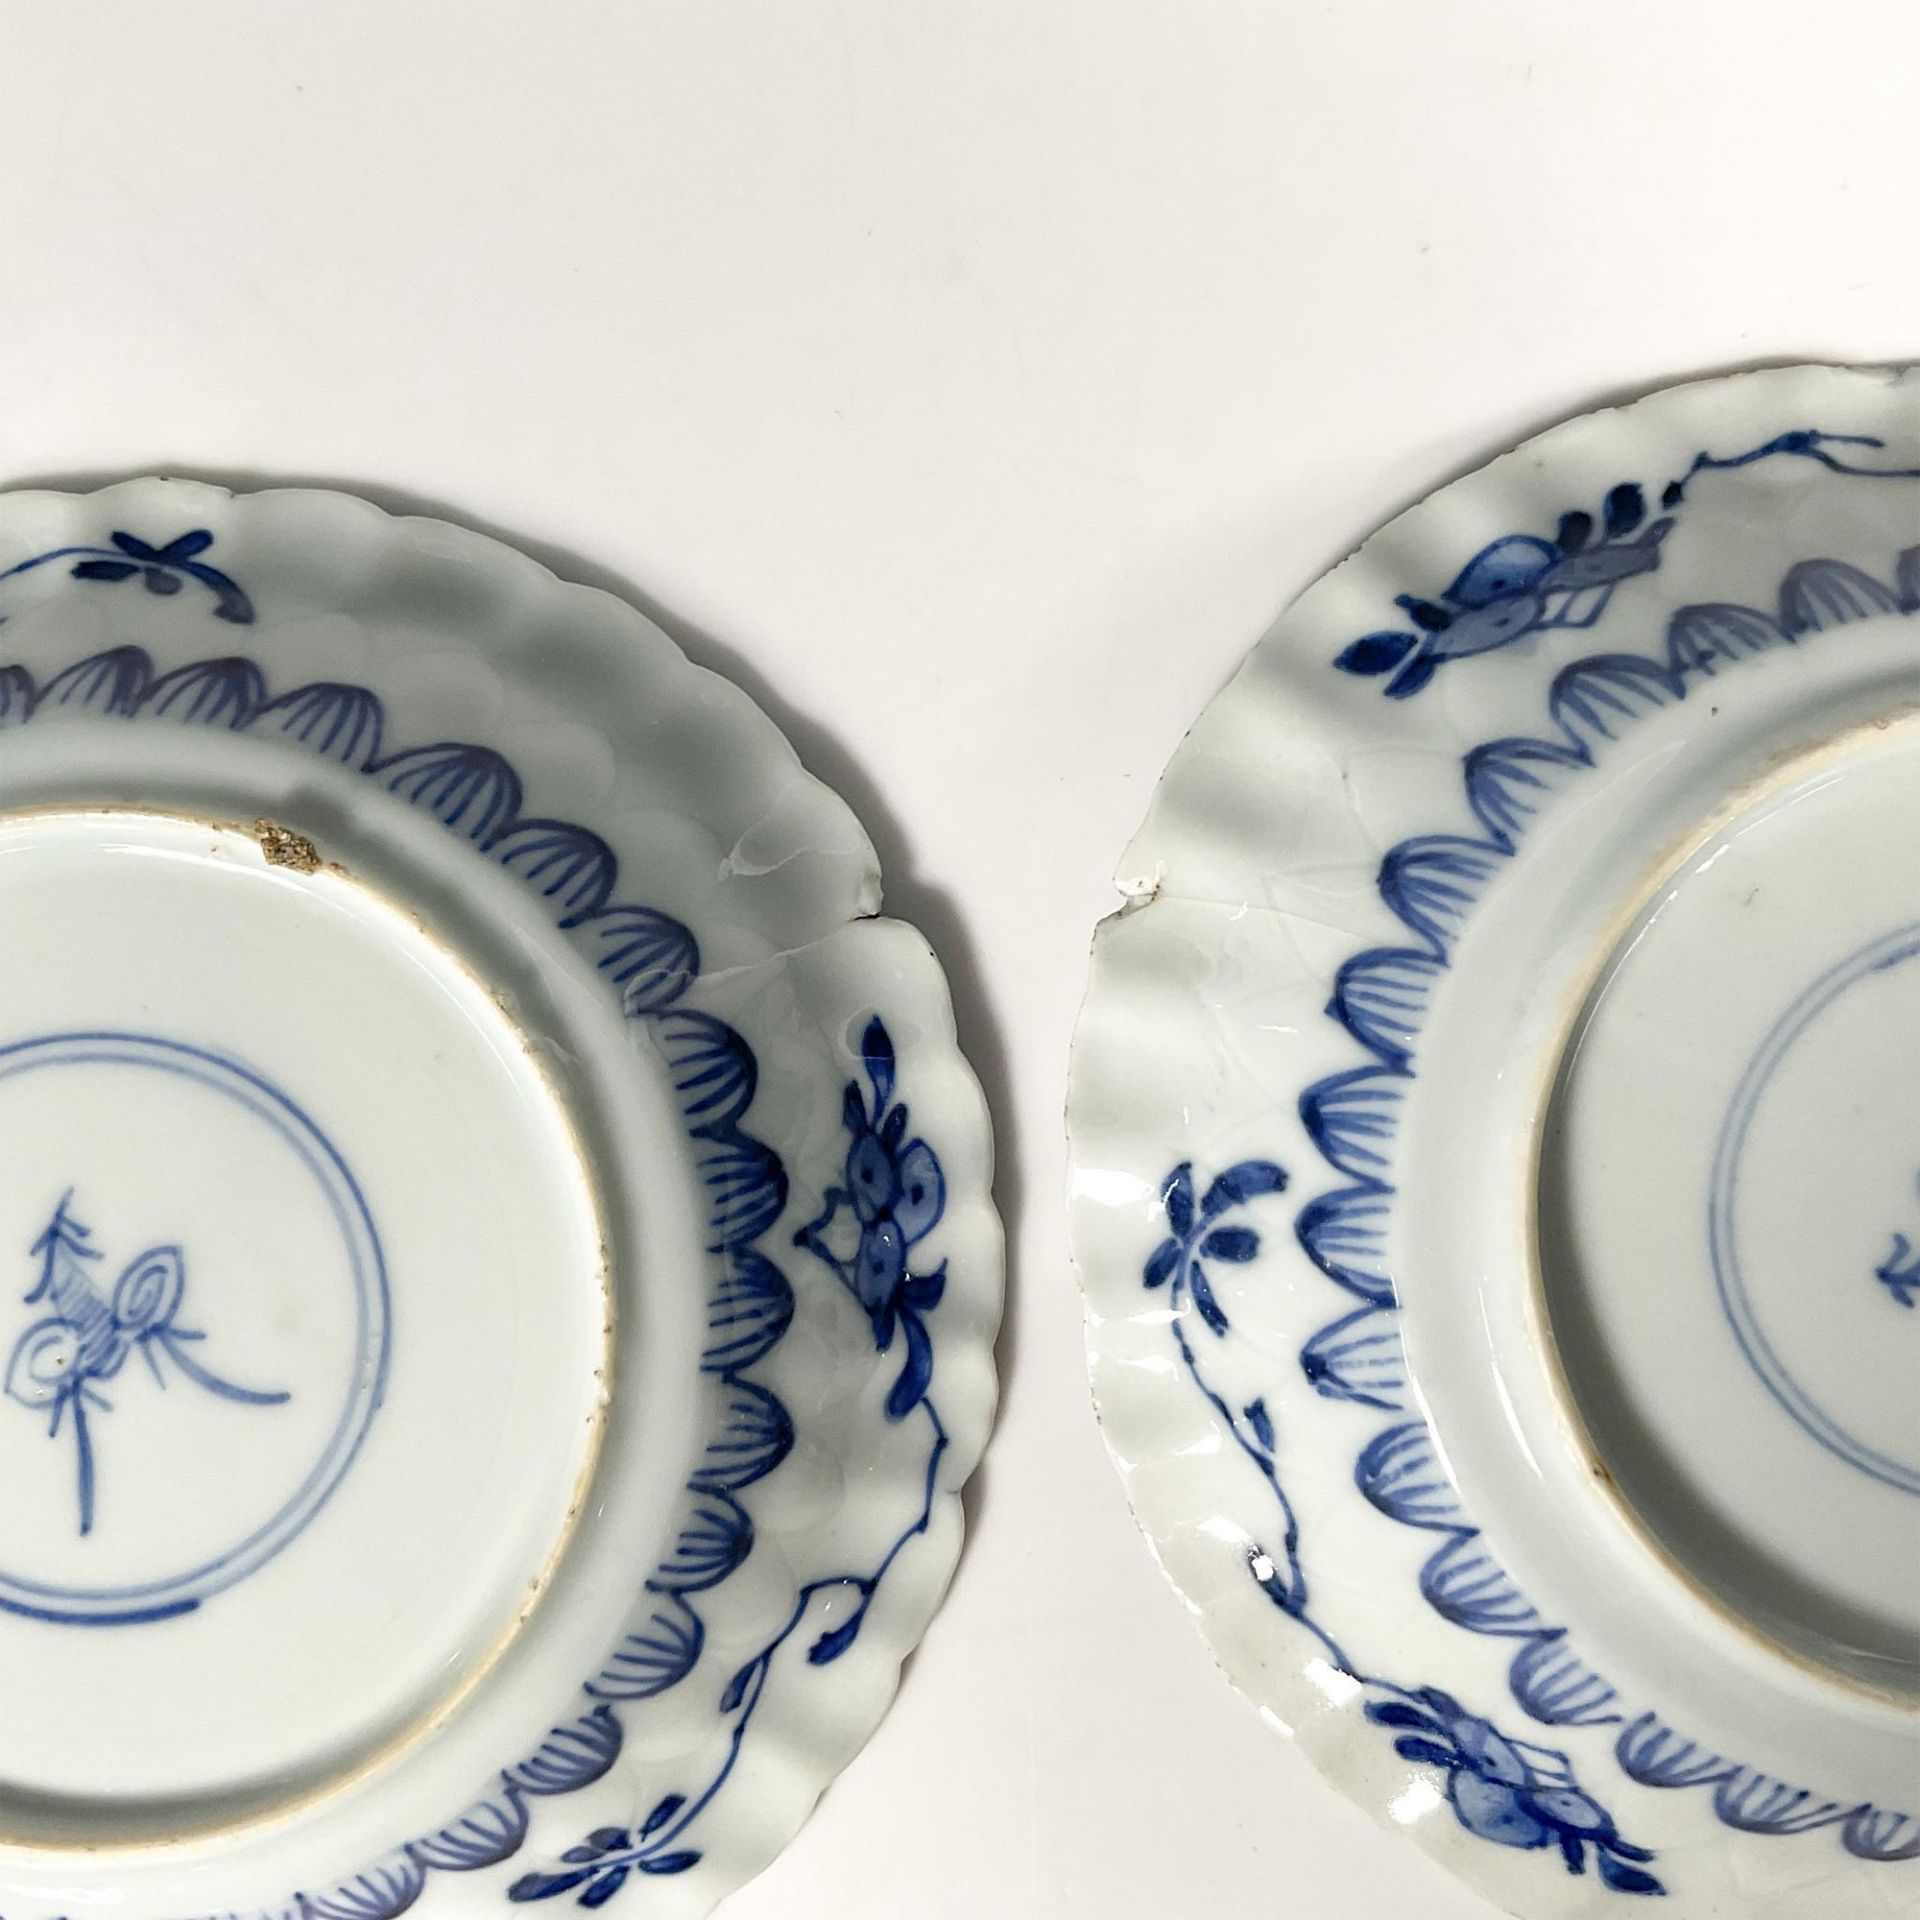 3 Pairs of Chinese Blue and White Porcelain Saucers - Image 3 of 3